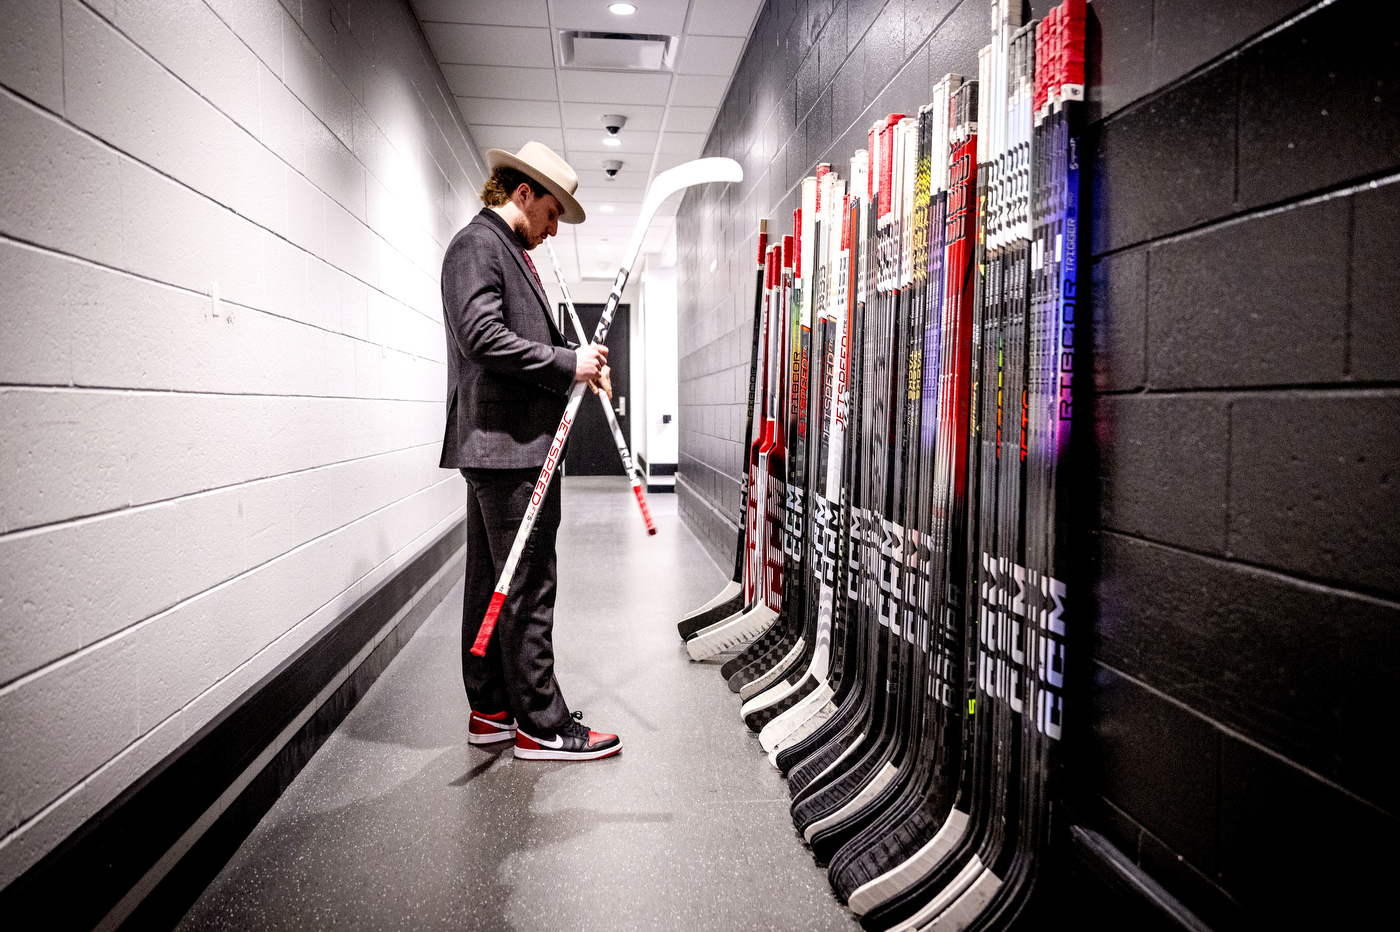 Men's hockey player in a suit and a felt hat holding hockey sticks in the hallway in TD Garden.